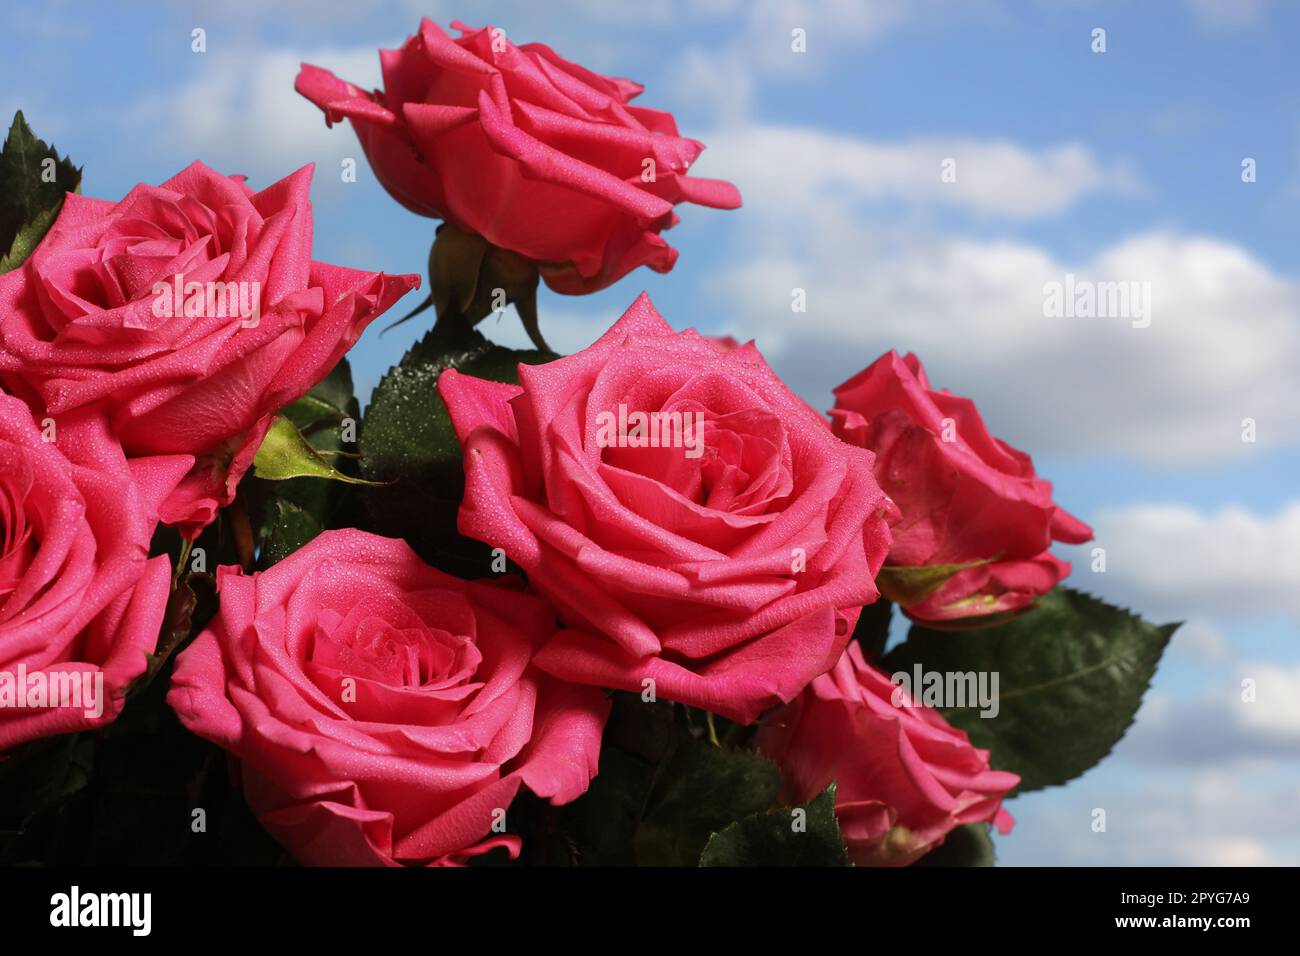 Bouquet of Fresh Pink Roses outdoors with blue sky in background Stock Photo